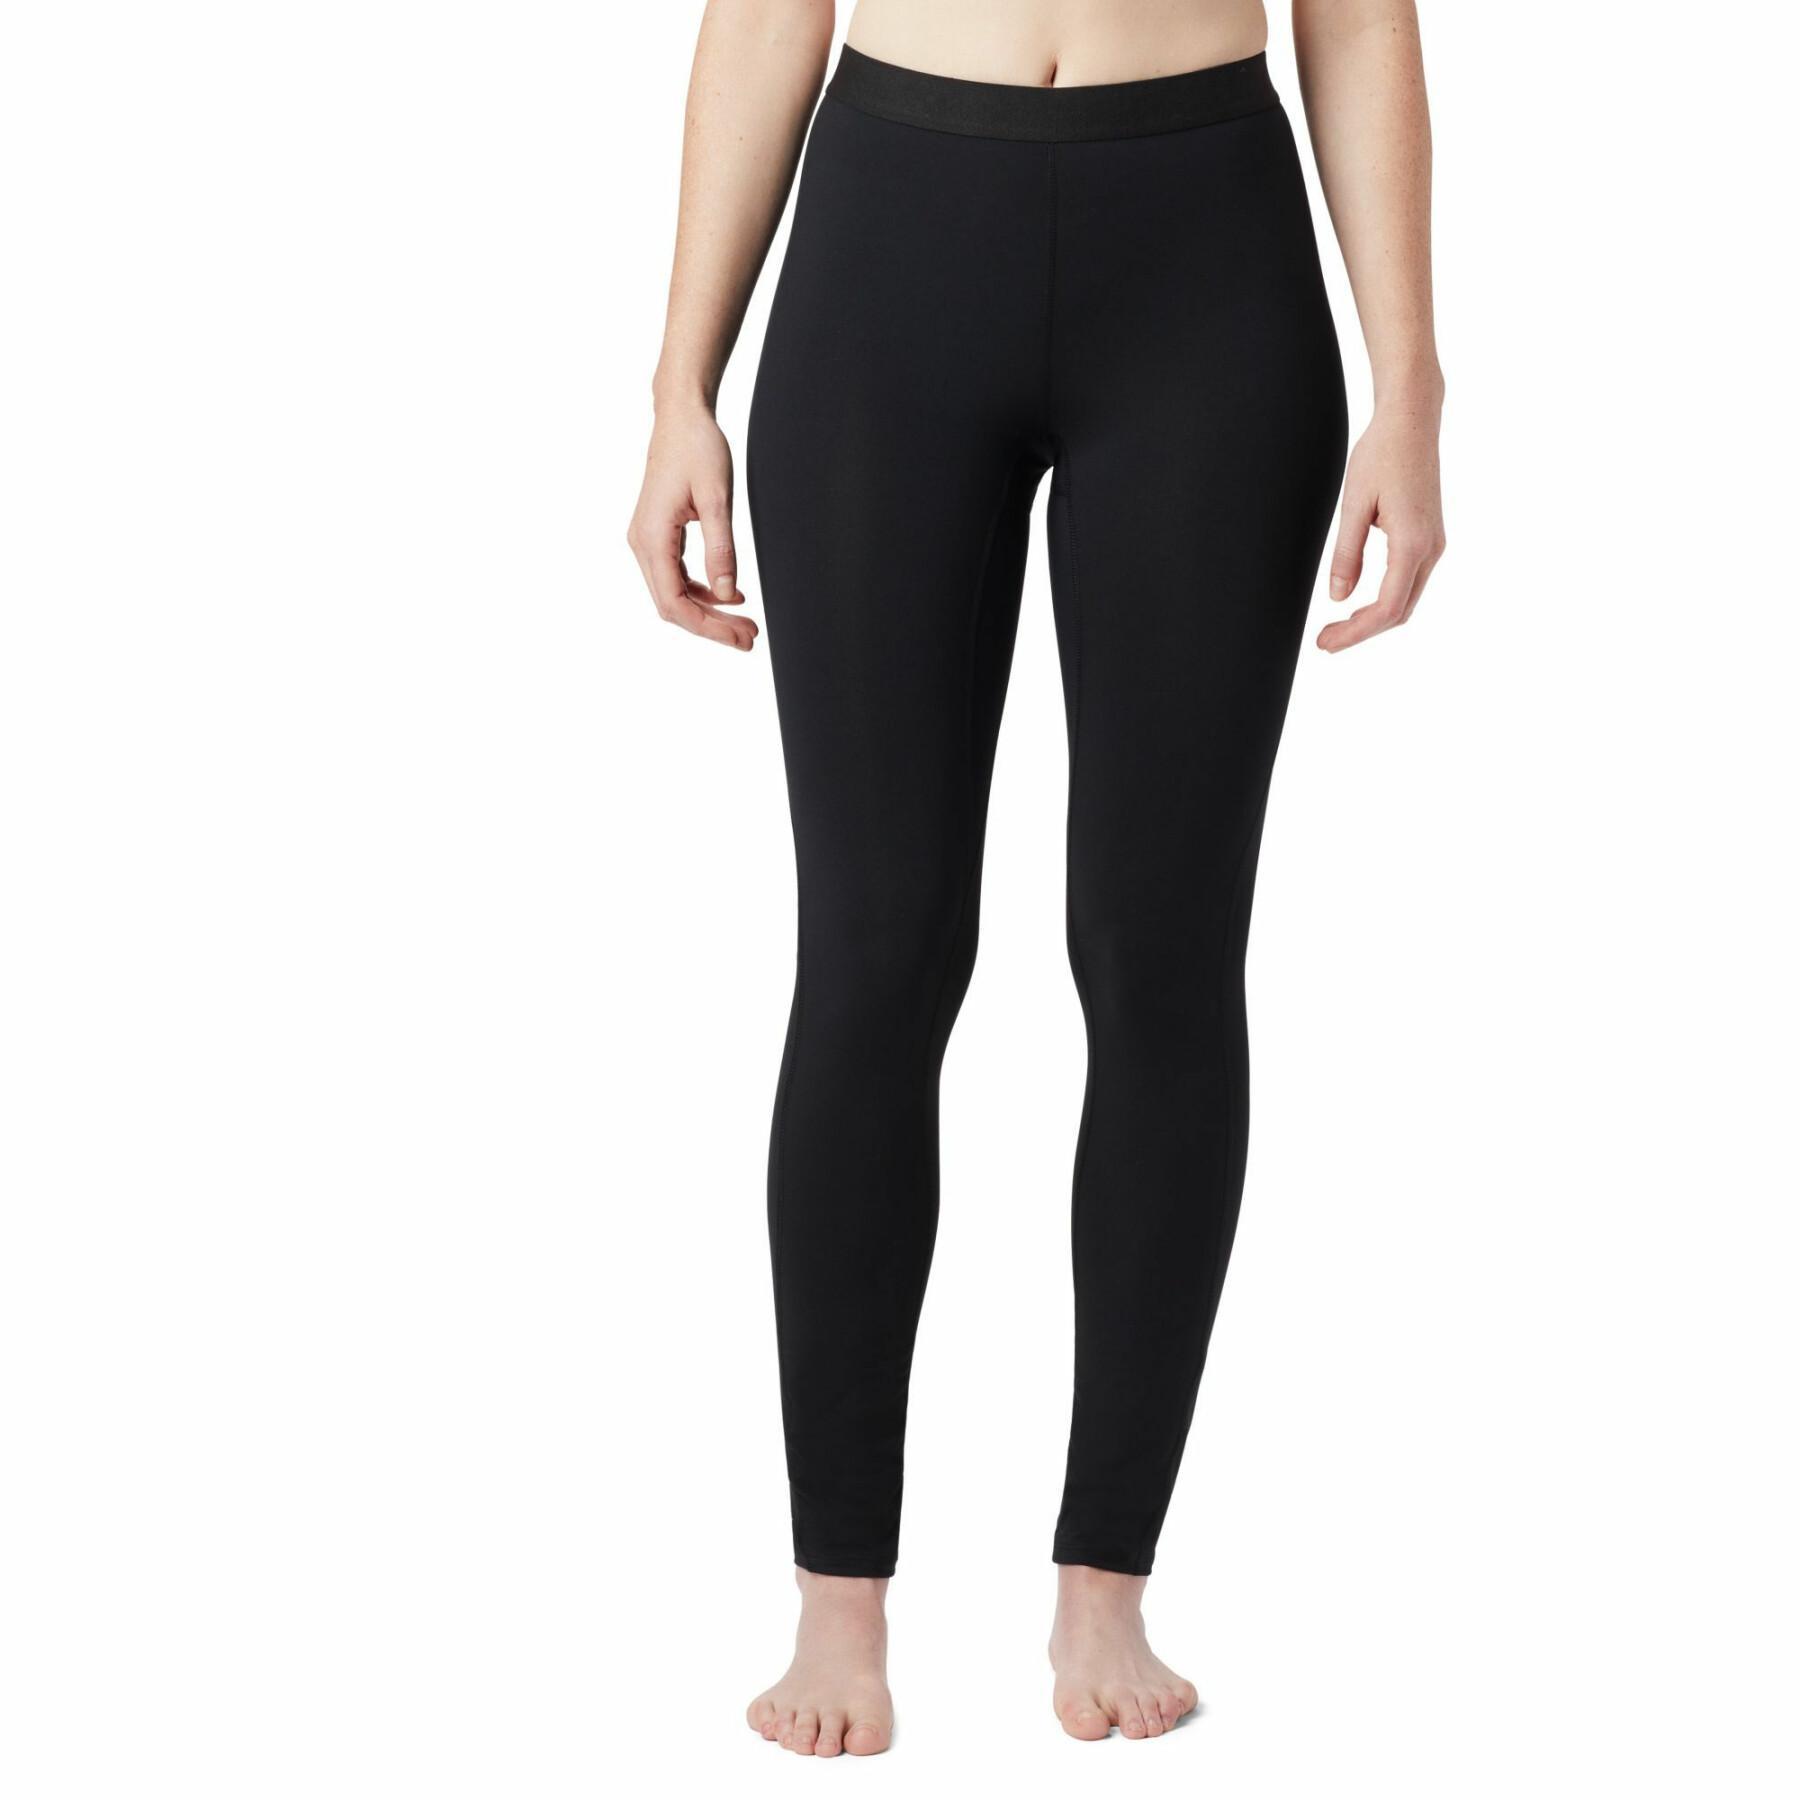 Leggings de mujer Columbia Midweight Stretch